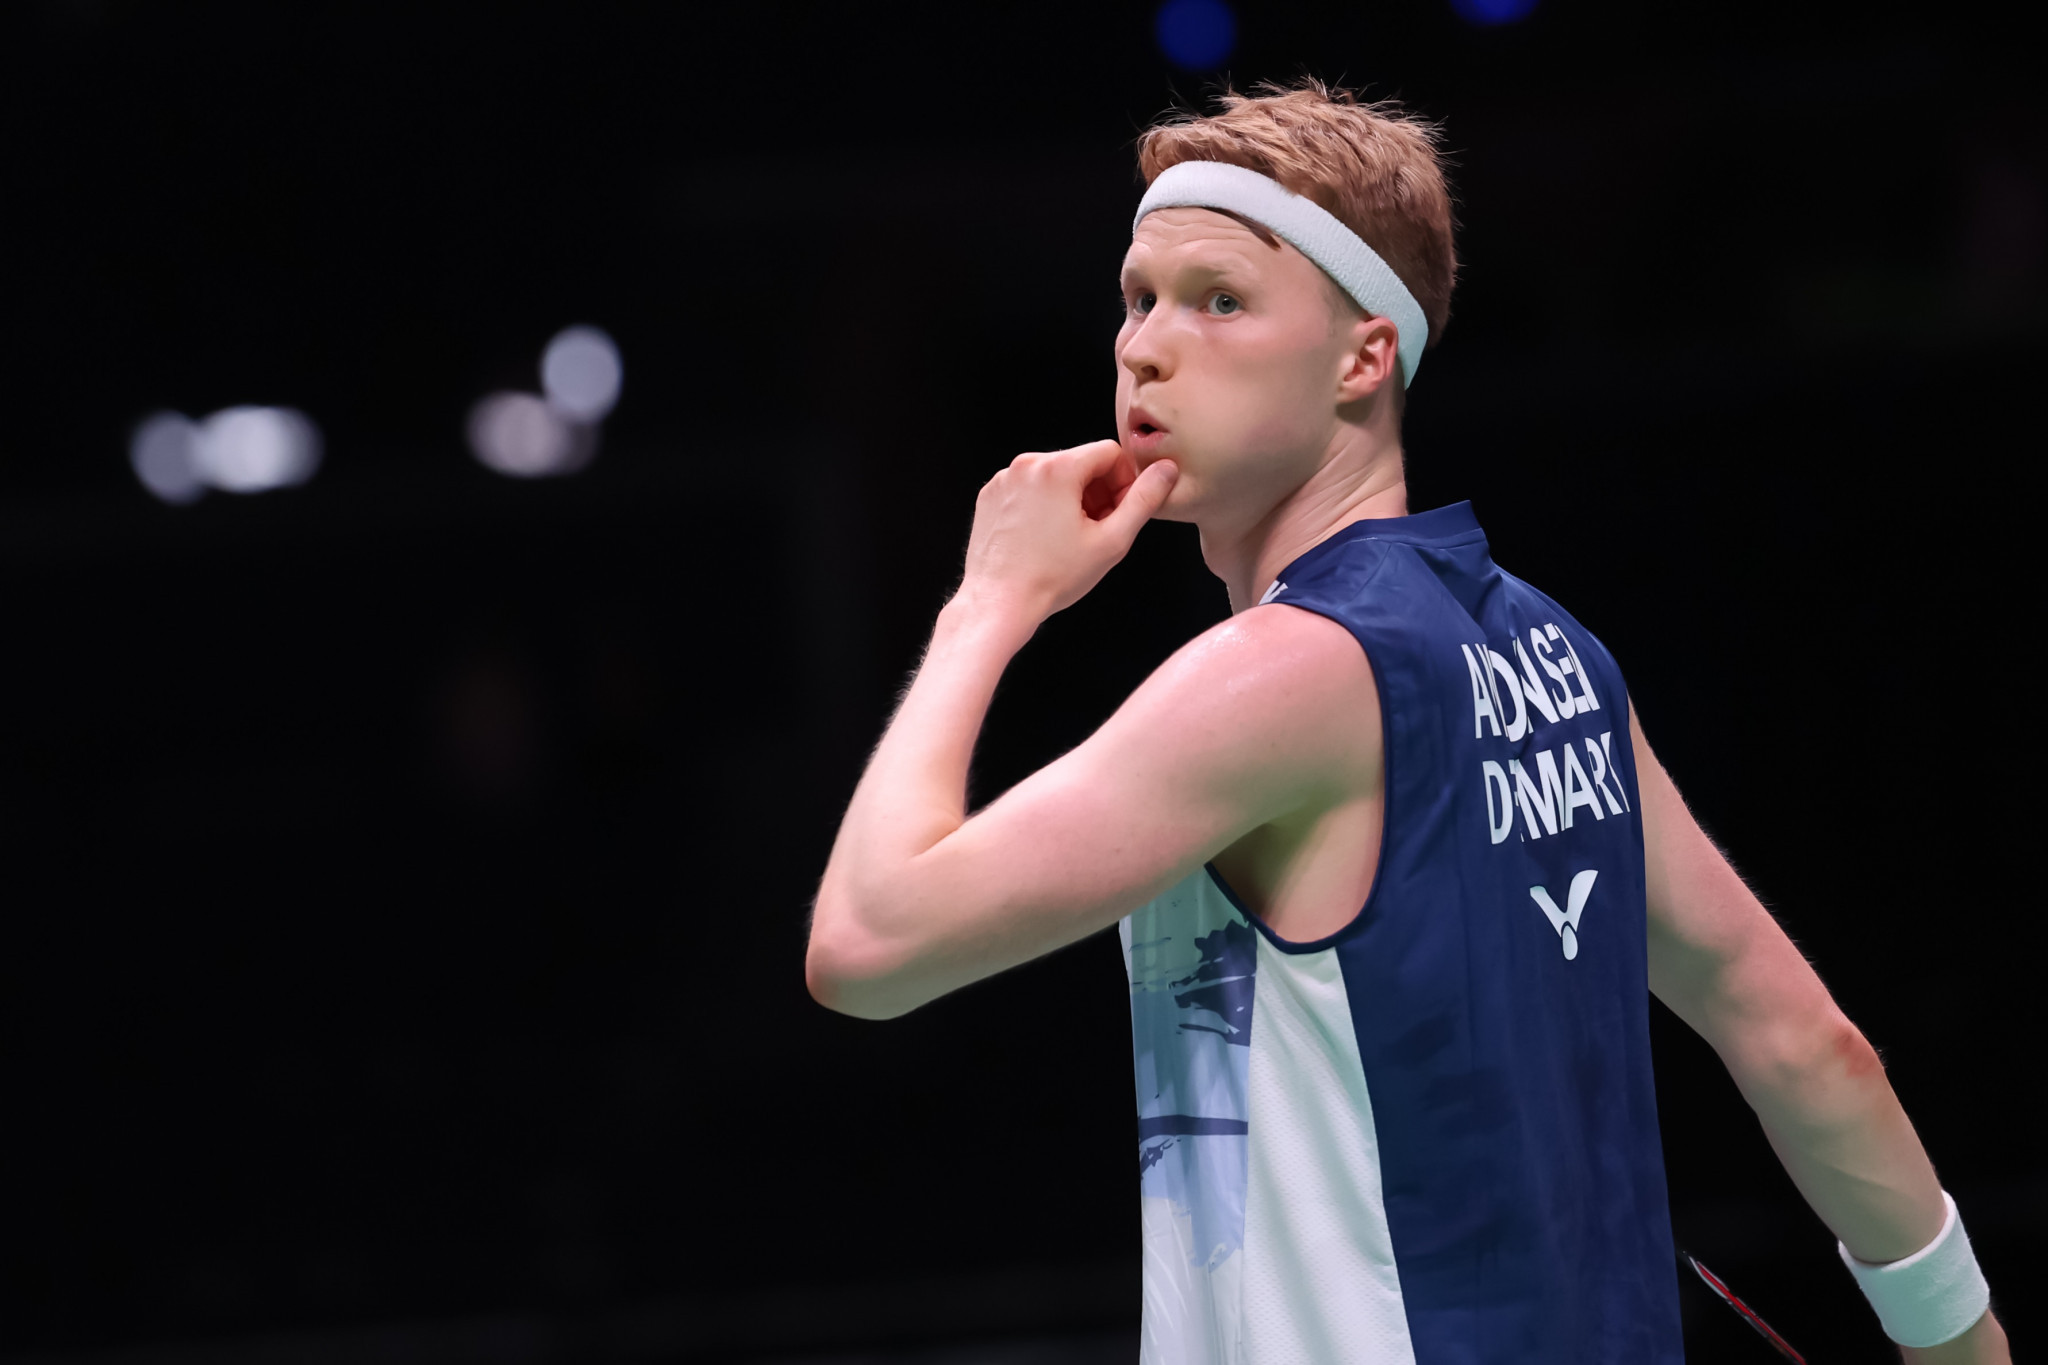 Anders Antonsen was the first Danish winner of the day as he swept into the second round ©Badmintonphoto